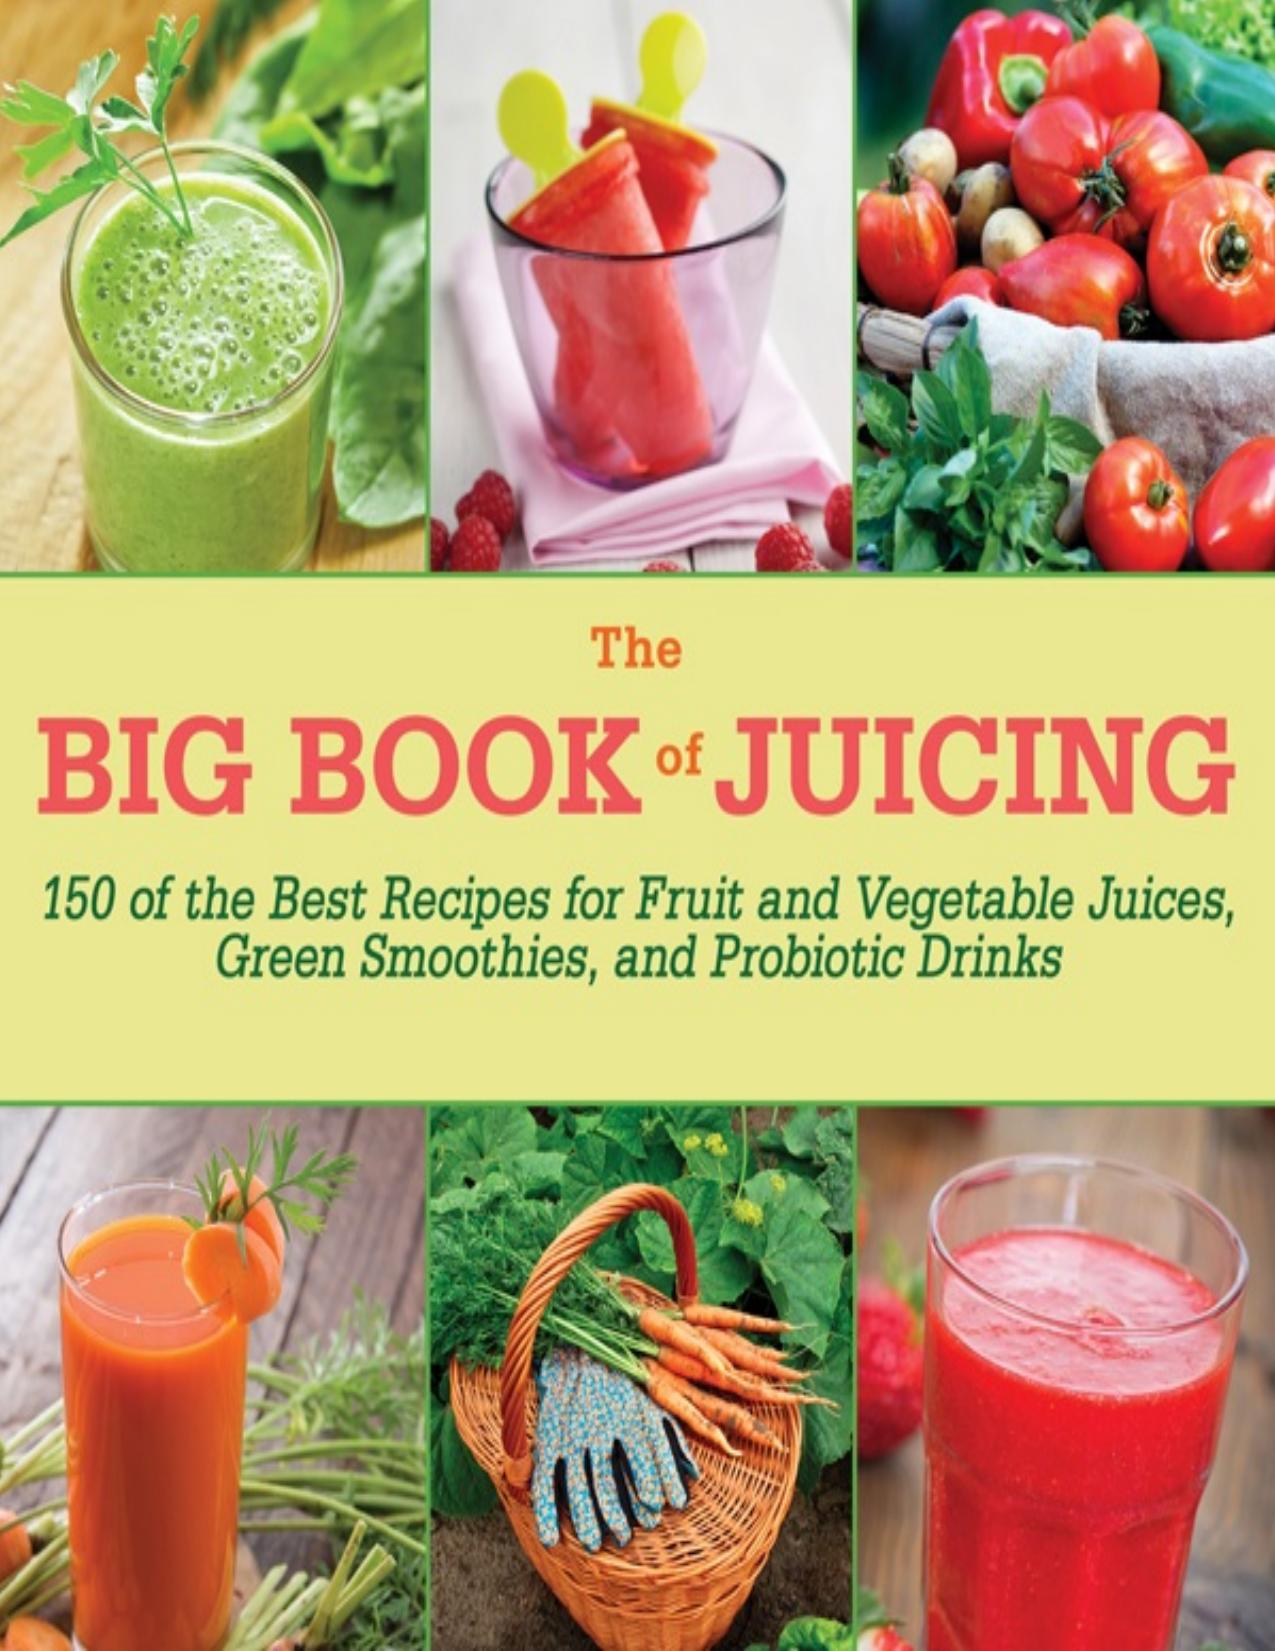 The Big Book of Juicing: 150 of the Best Recipes for Fruit and Vegetable Juices, Green Smoothies, and Probiotic Drinks - PDFDrive.com